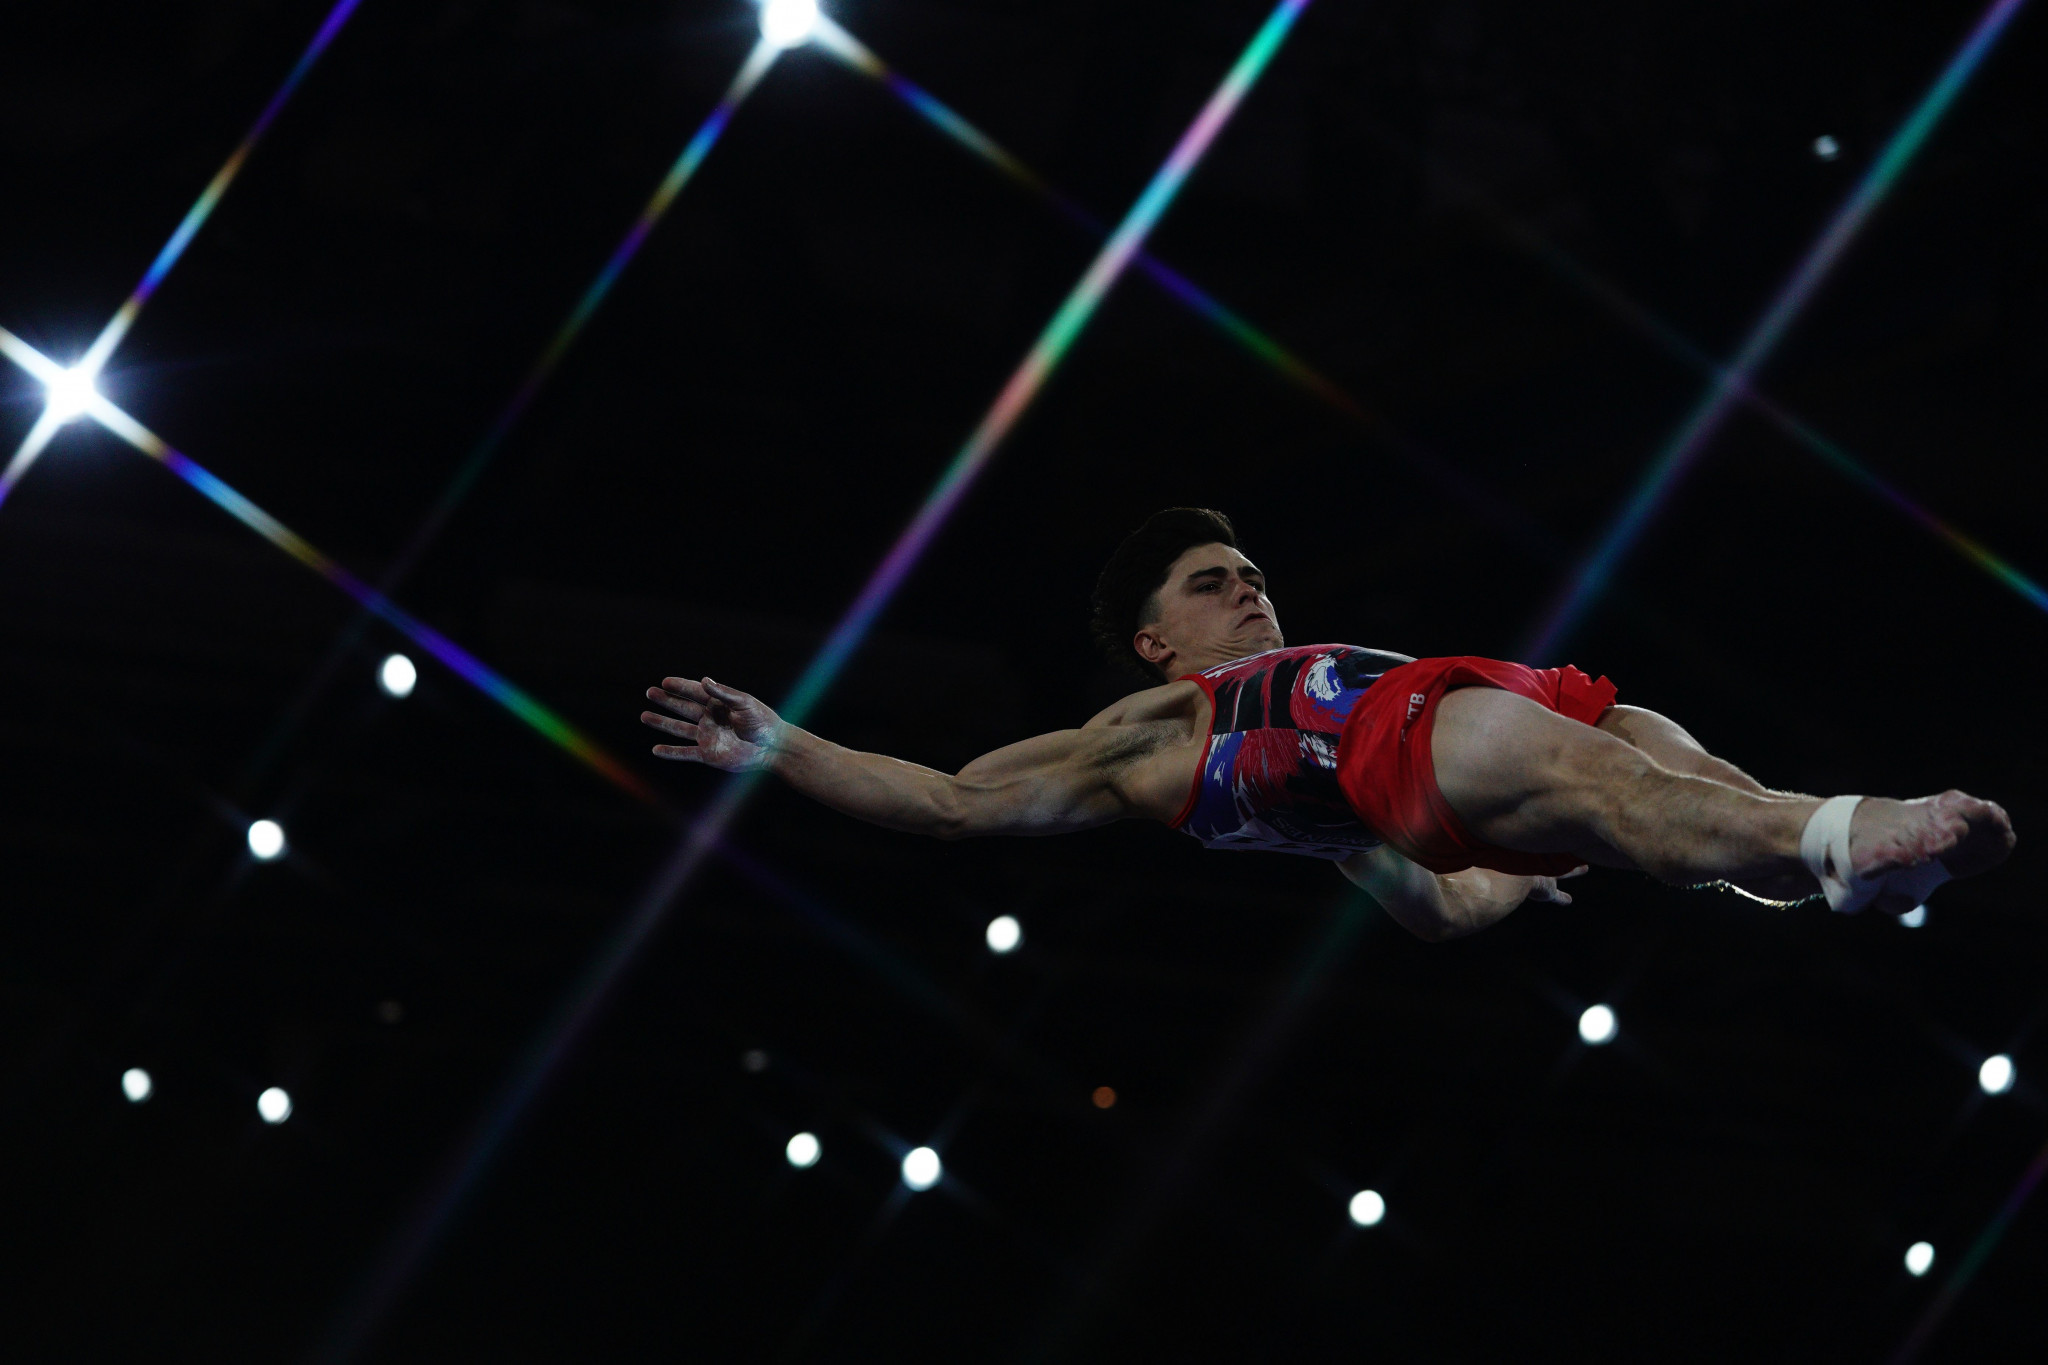 Artur Dalaloyan also impressed as Russia ended the day in top spot on the team standings ©Getty Images